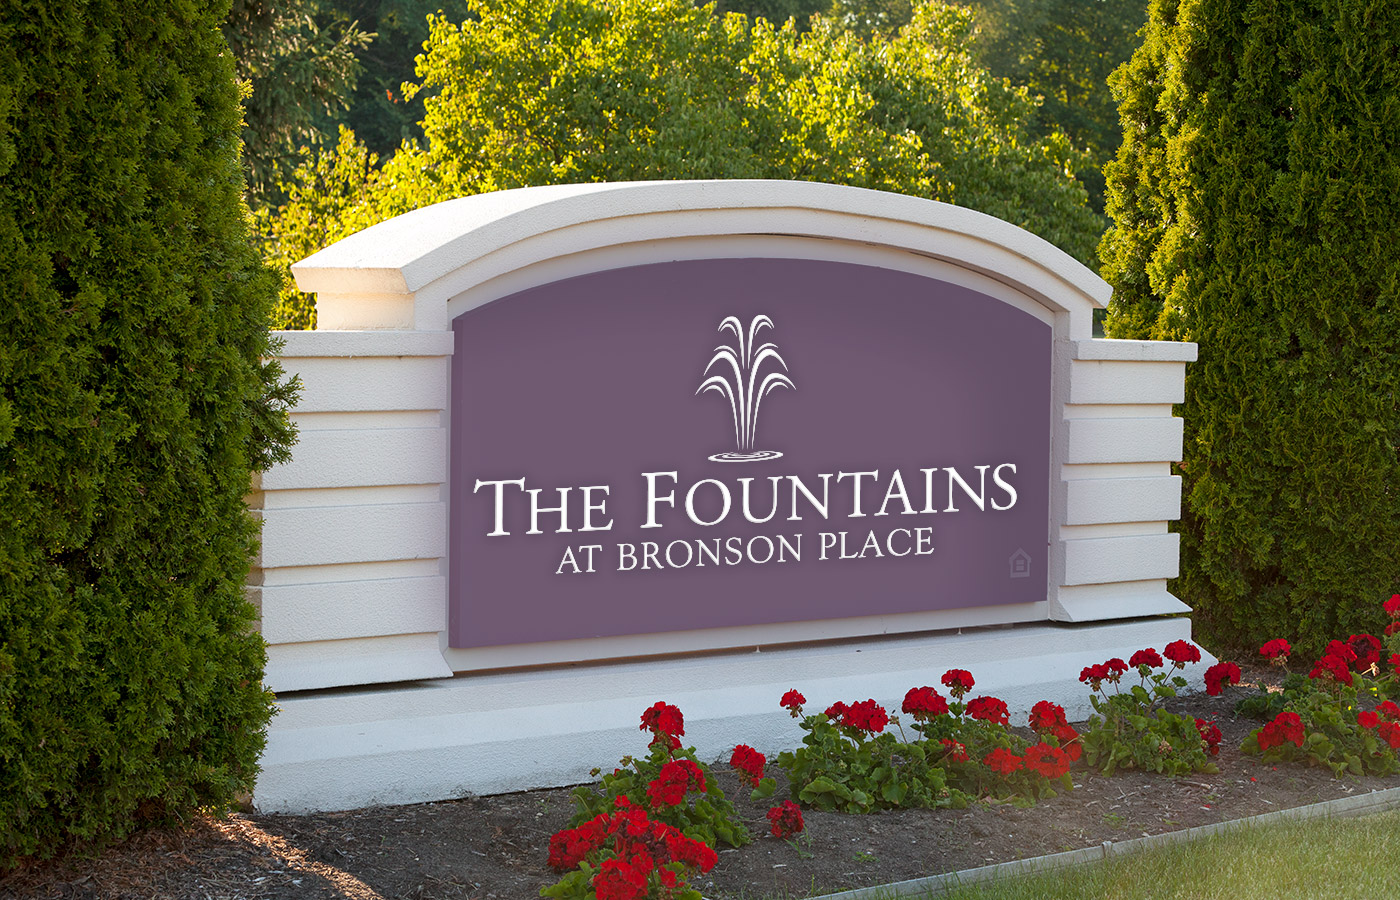 The Fountains at Bronson Place sign.